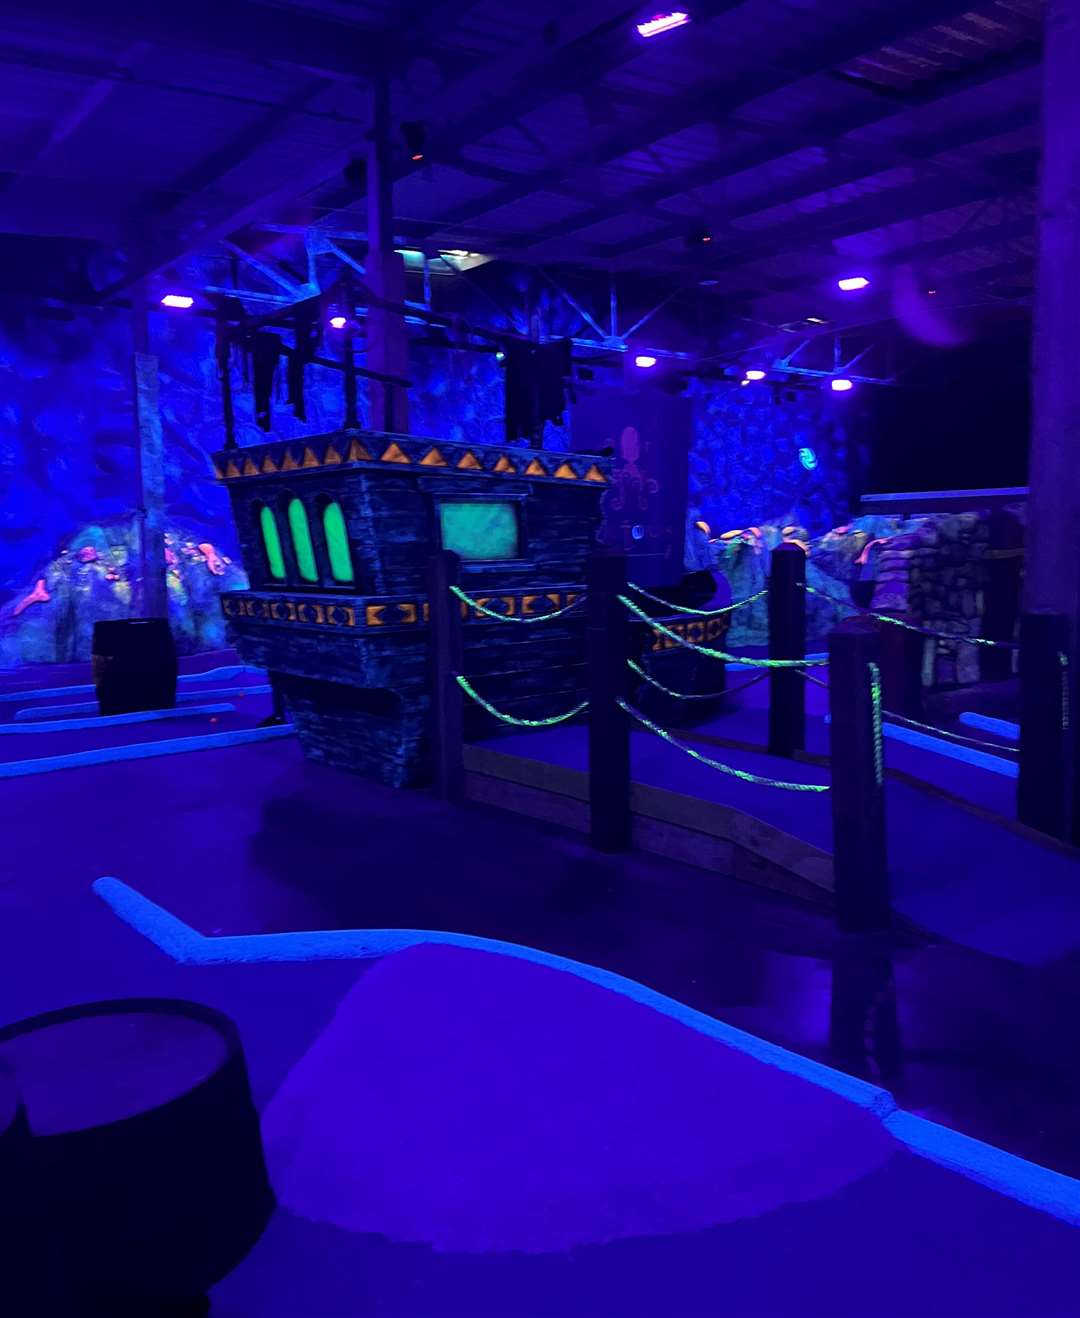 The venue’s owners also run a soft play area next door